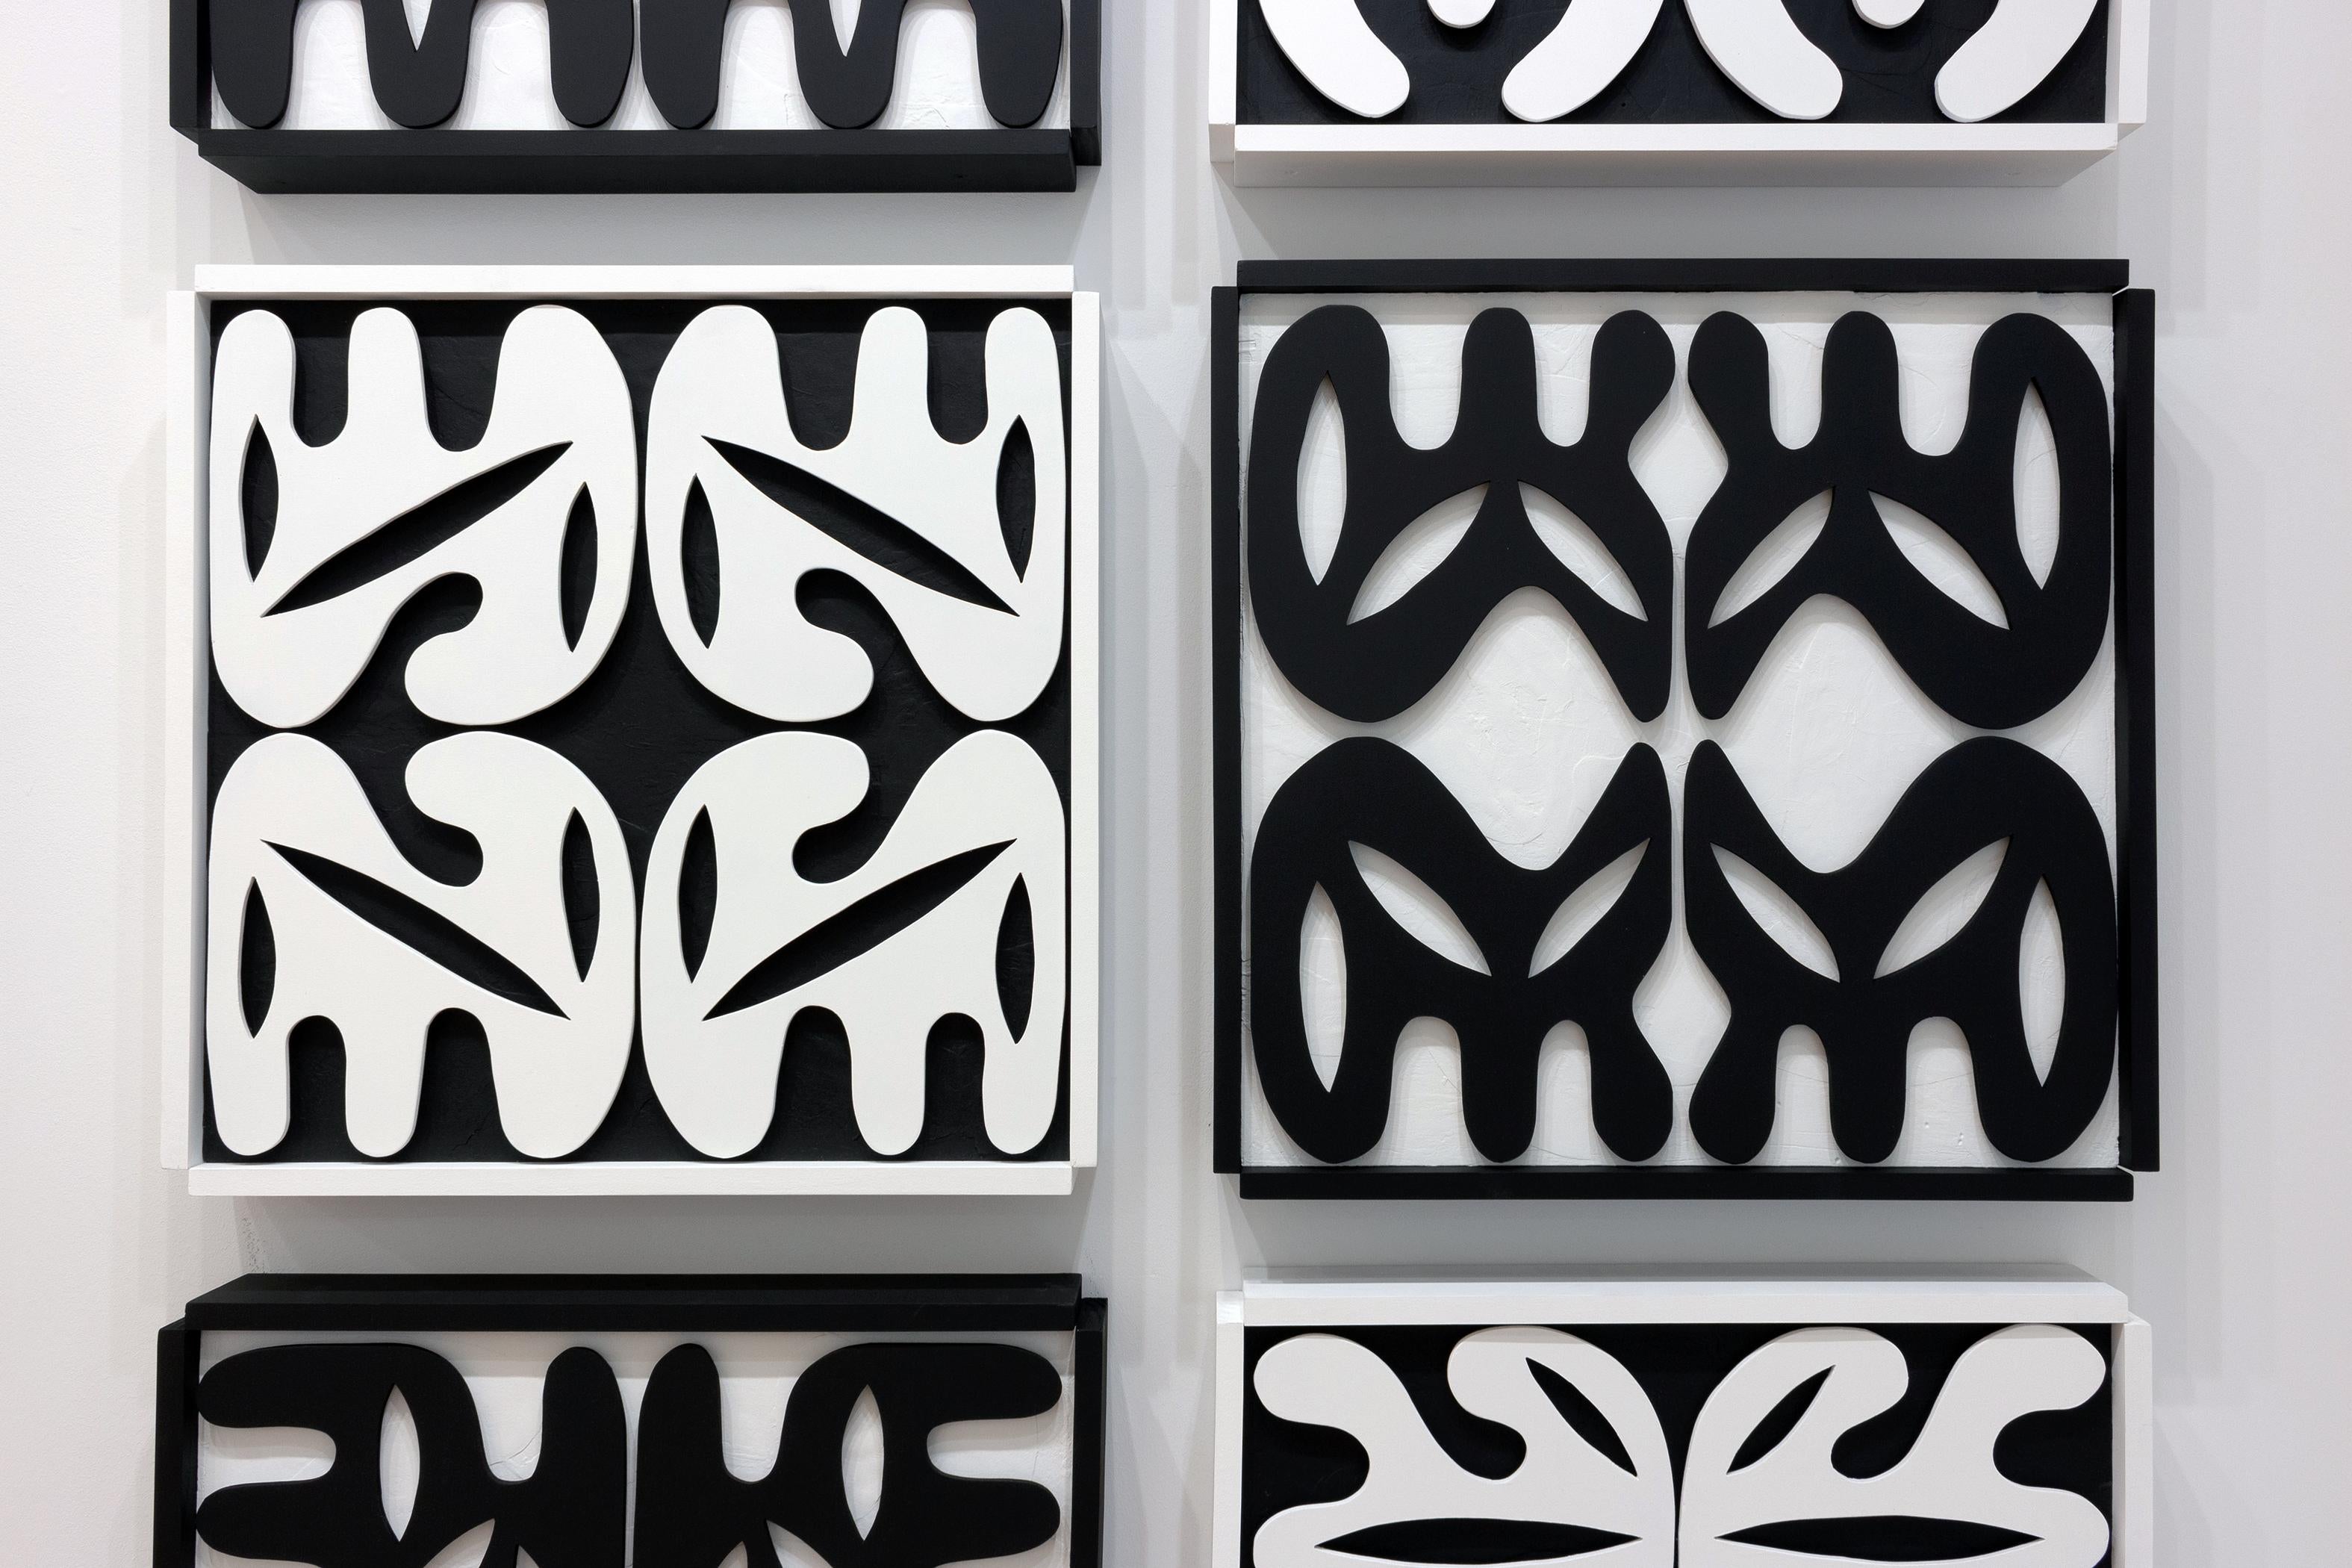 This large-scale multi piece work features organic and undulating wood-cut shapes. Black and white.

Colombian-born, Atlanta-based artist Esteban Patino creates paintings, collages, and sculptures that explore the multitudes of language creation and